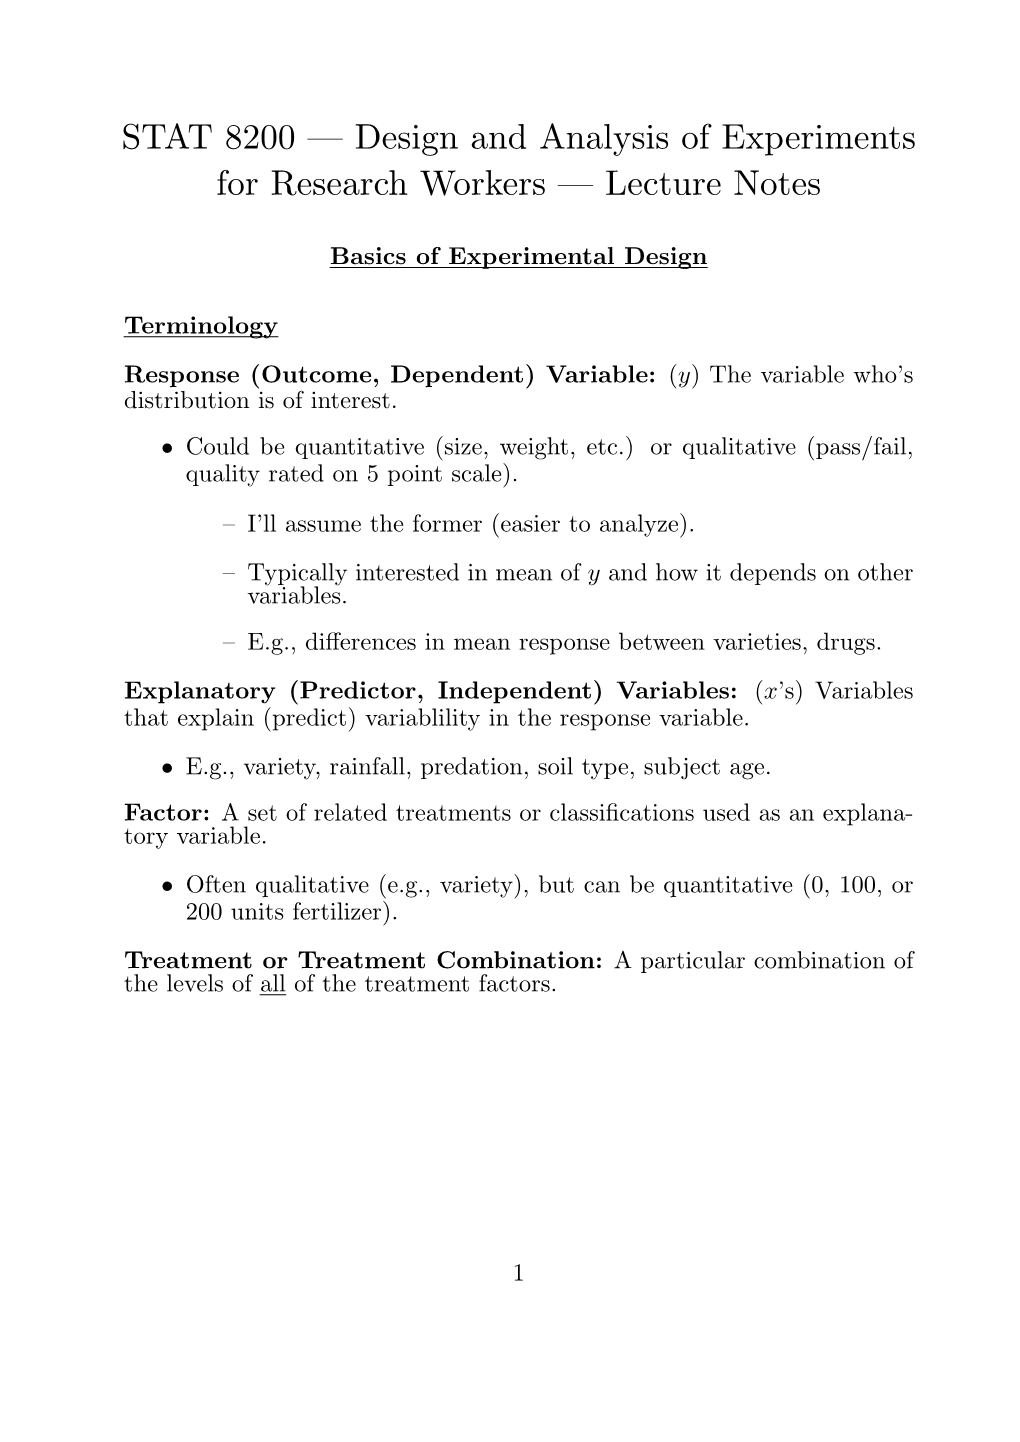 STAT 8200 — Design and Analysis of Experiments for Research Workers — Lecture Notes